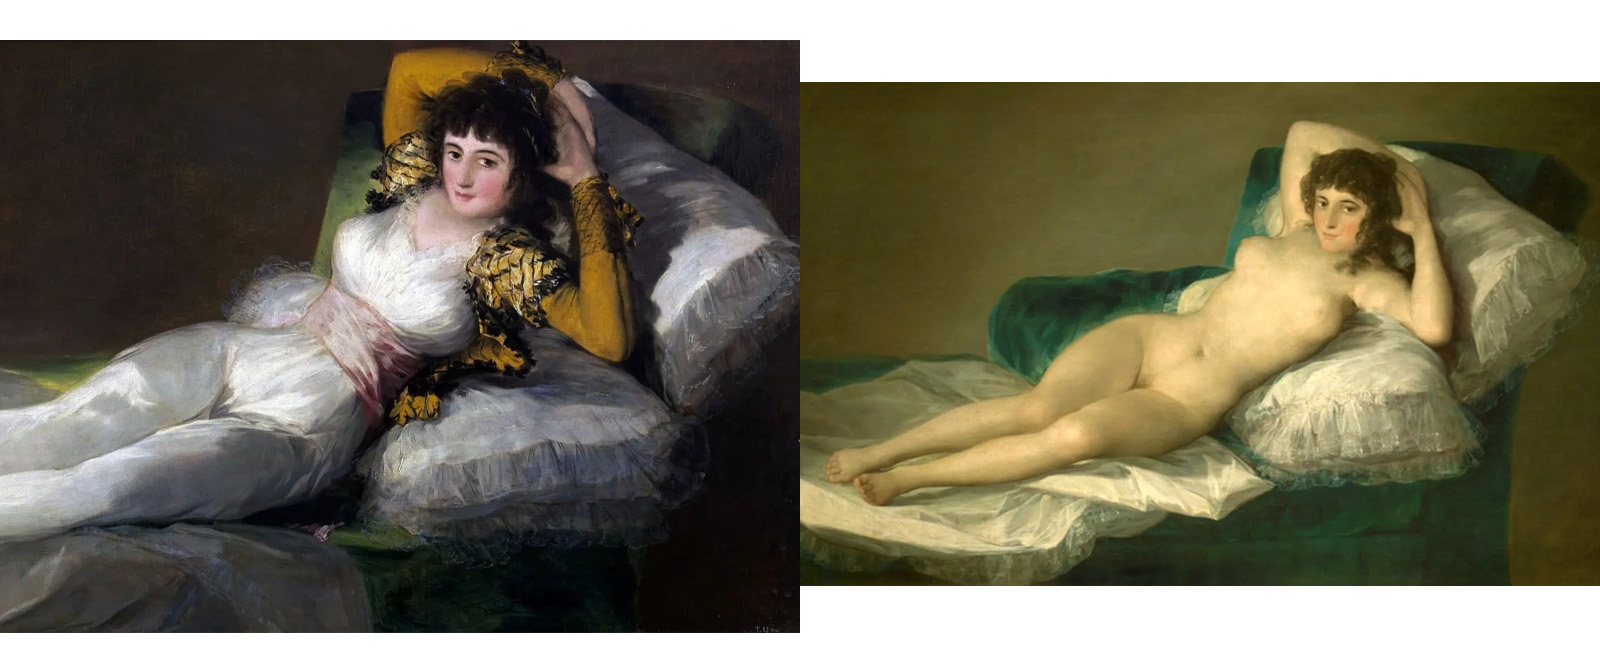 Evocative, scary, but insanely talented paintings by Francisco Goya that were way ahead of their time. 